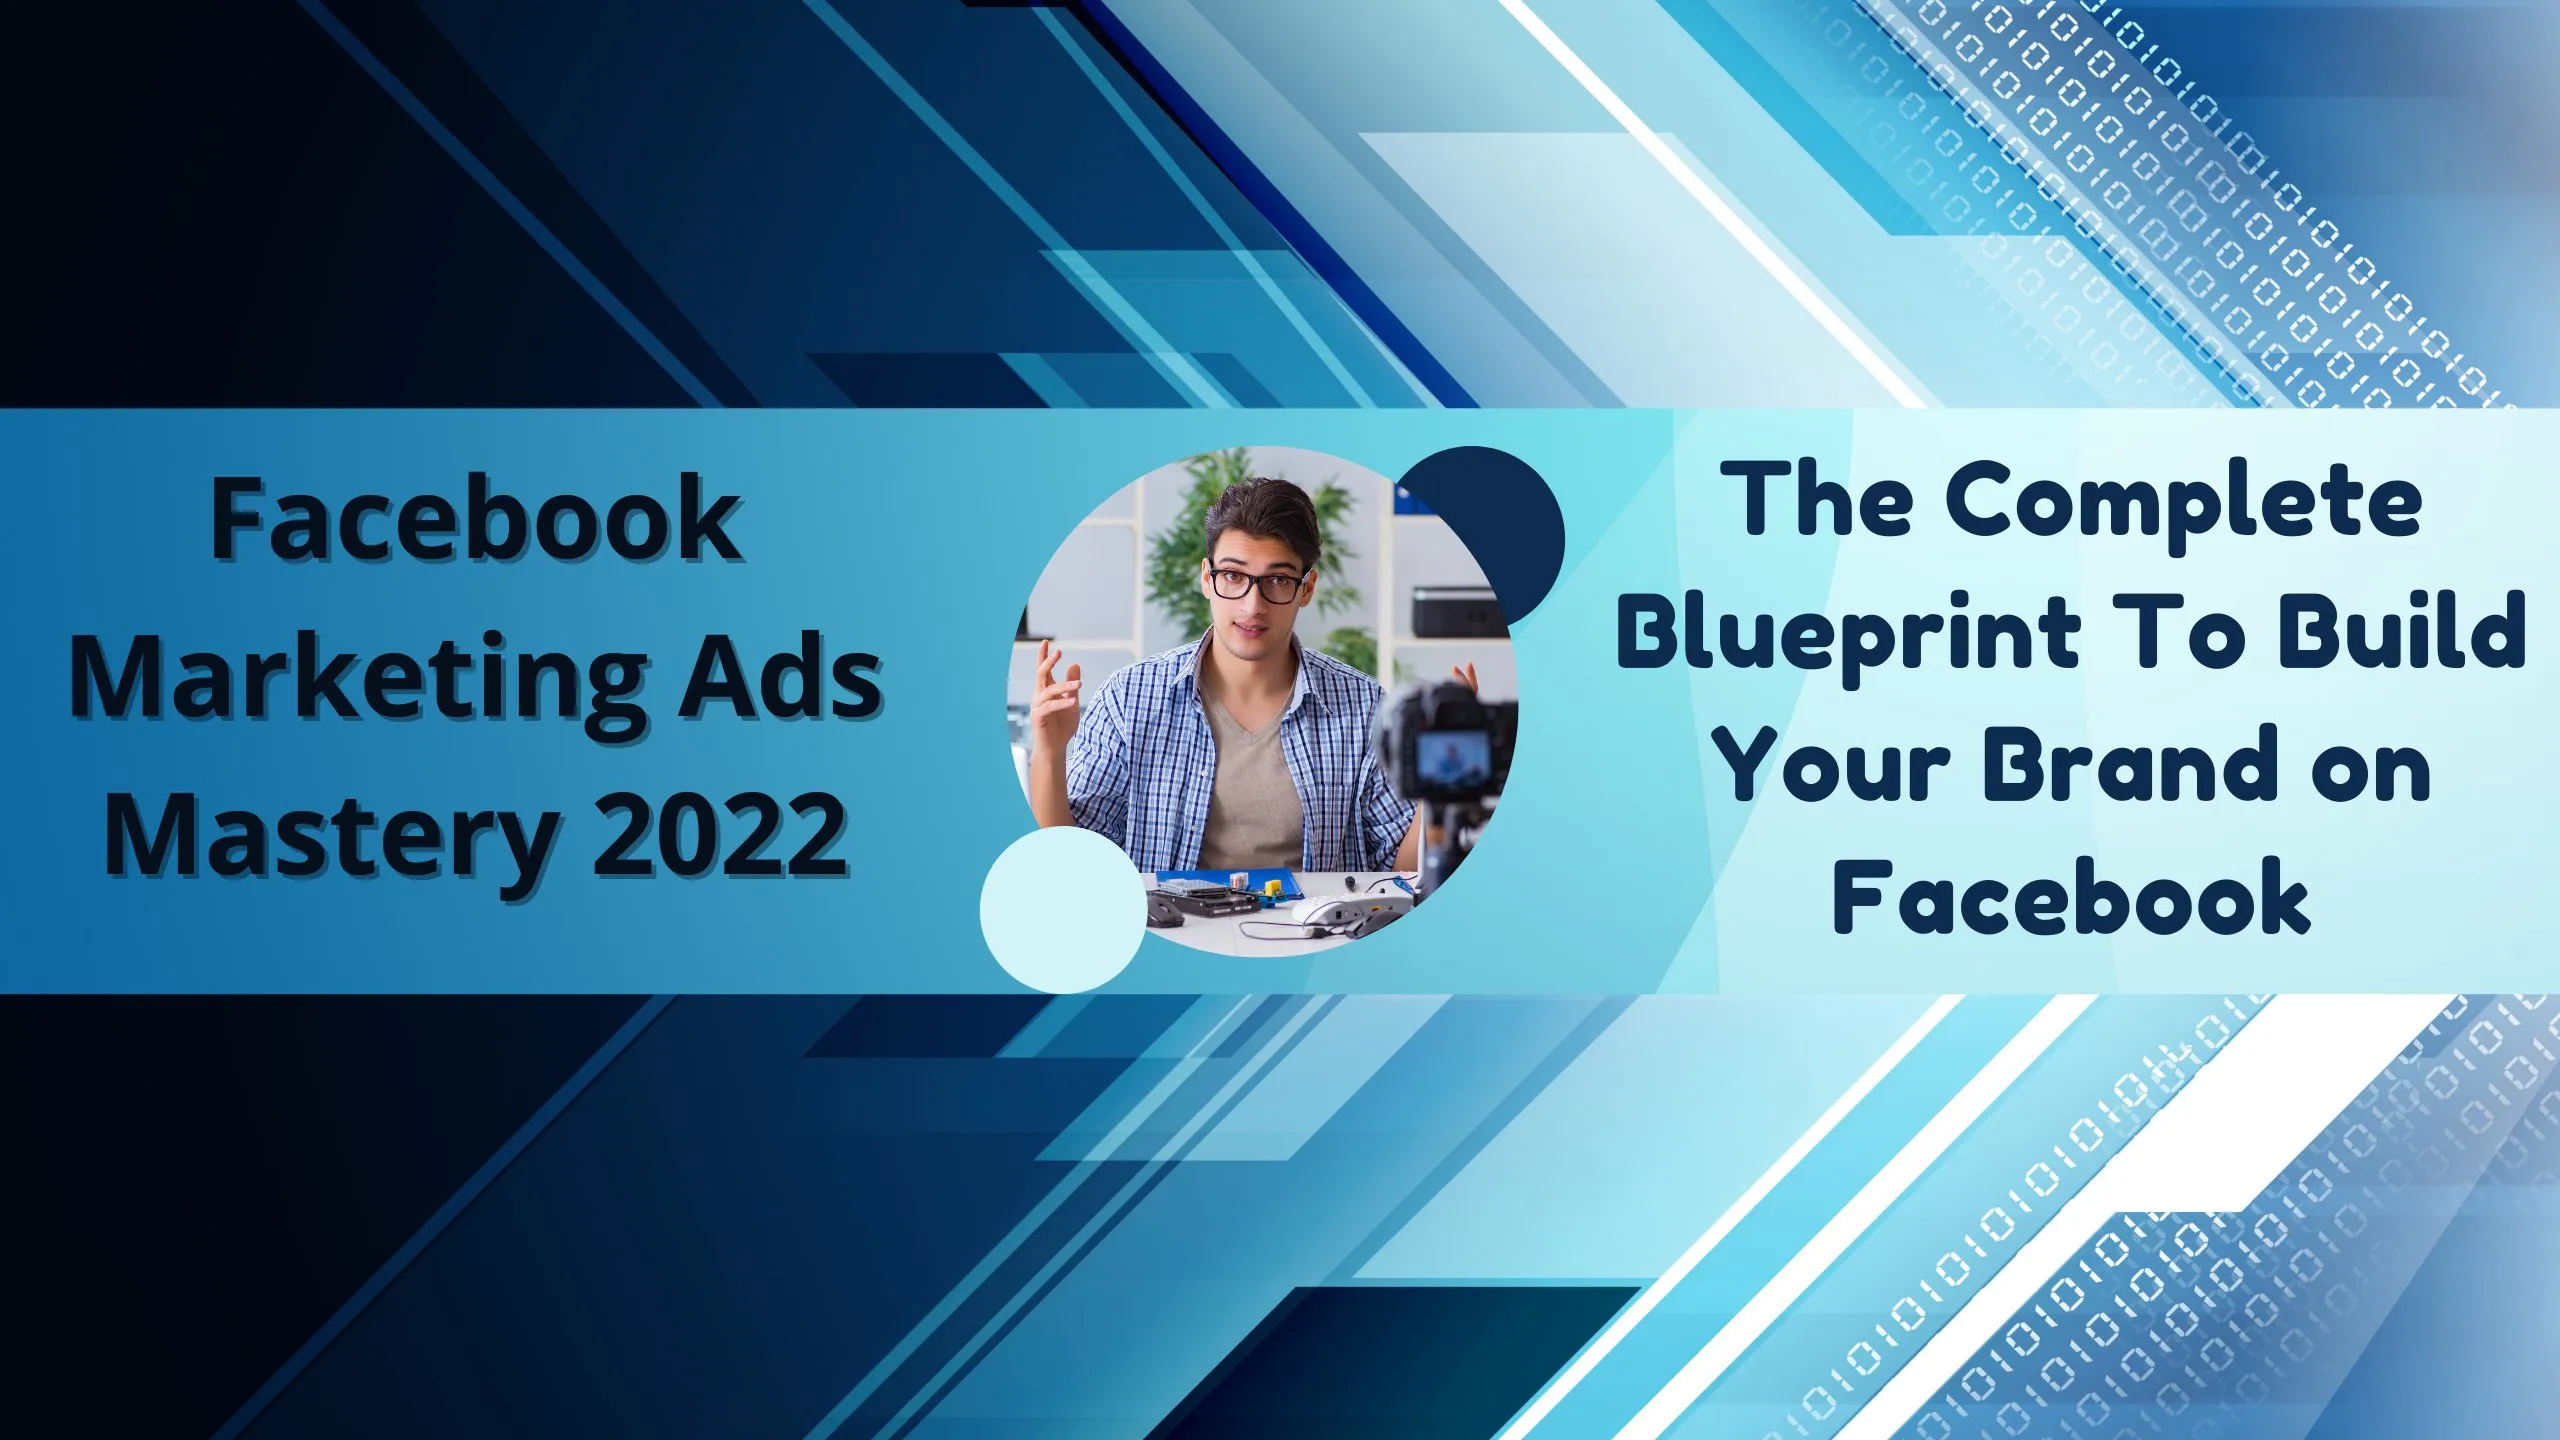 Facebook Marketing Ads Mastery 2022: The Complete Blueprint To Build Your Brand on Facebook